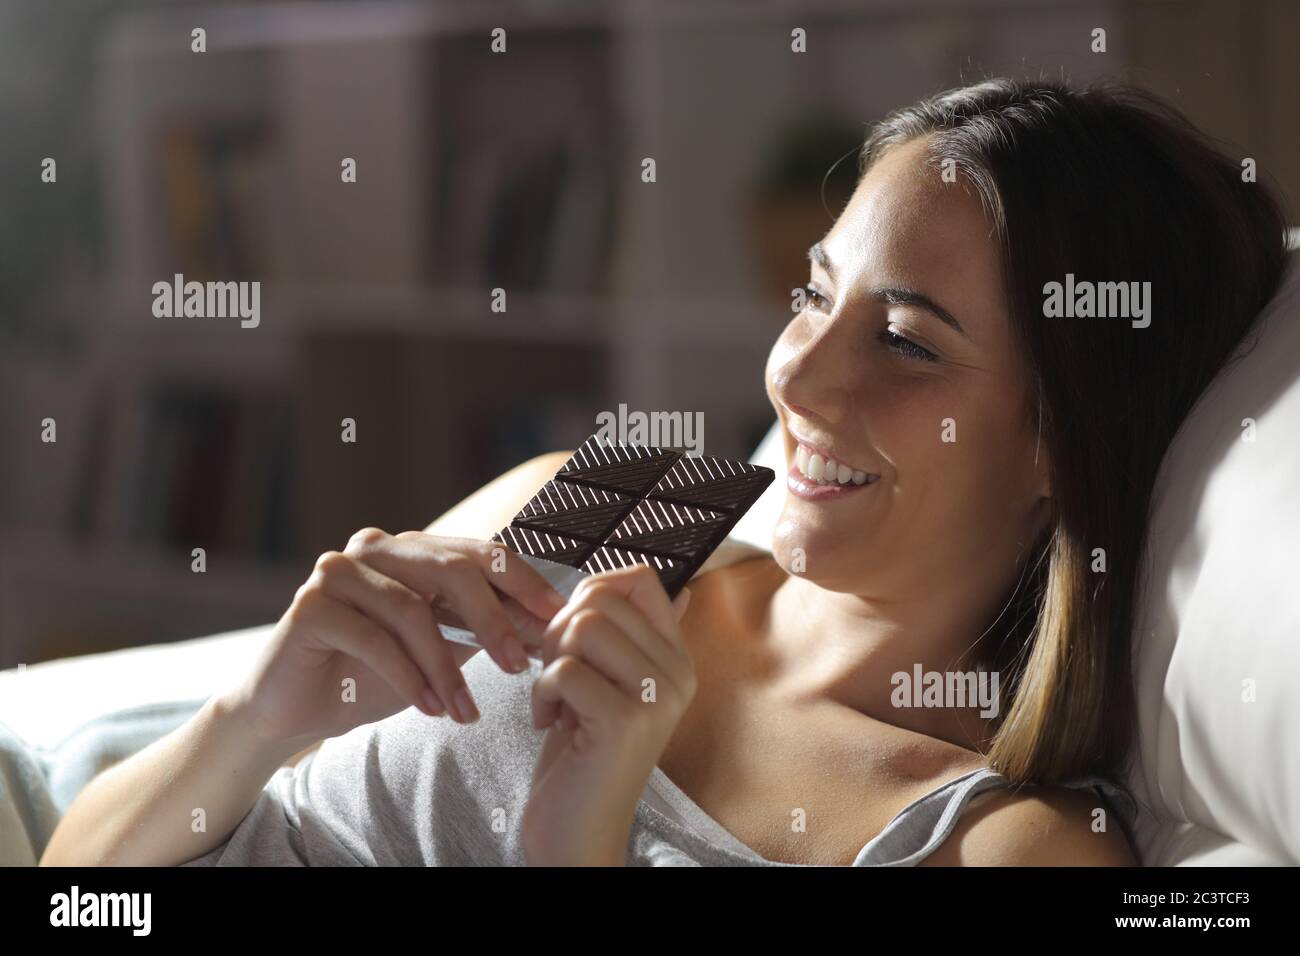 Happy girl eating chocolate bar sitting on a couch at home at night Stock Photo